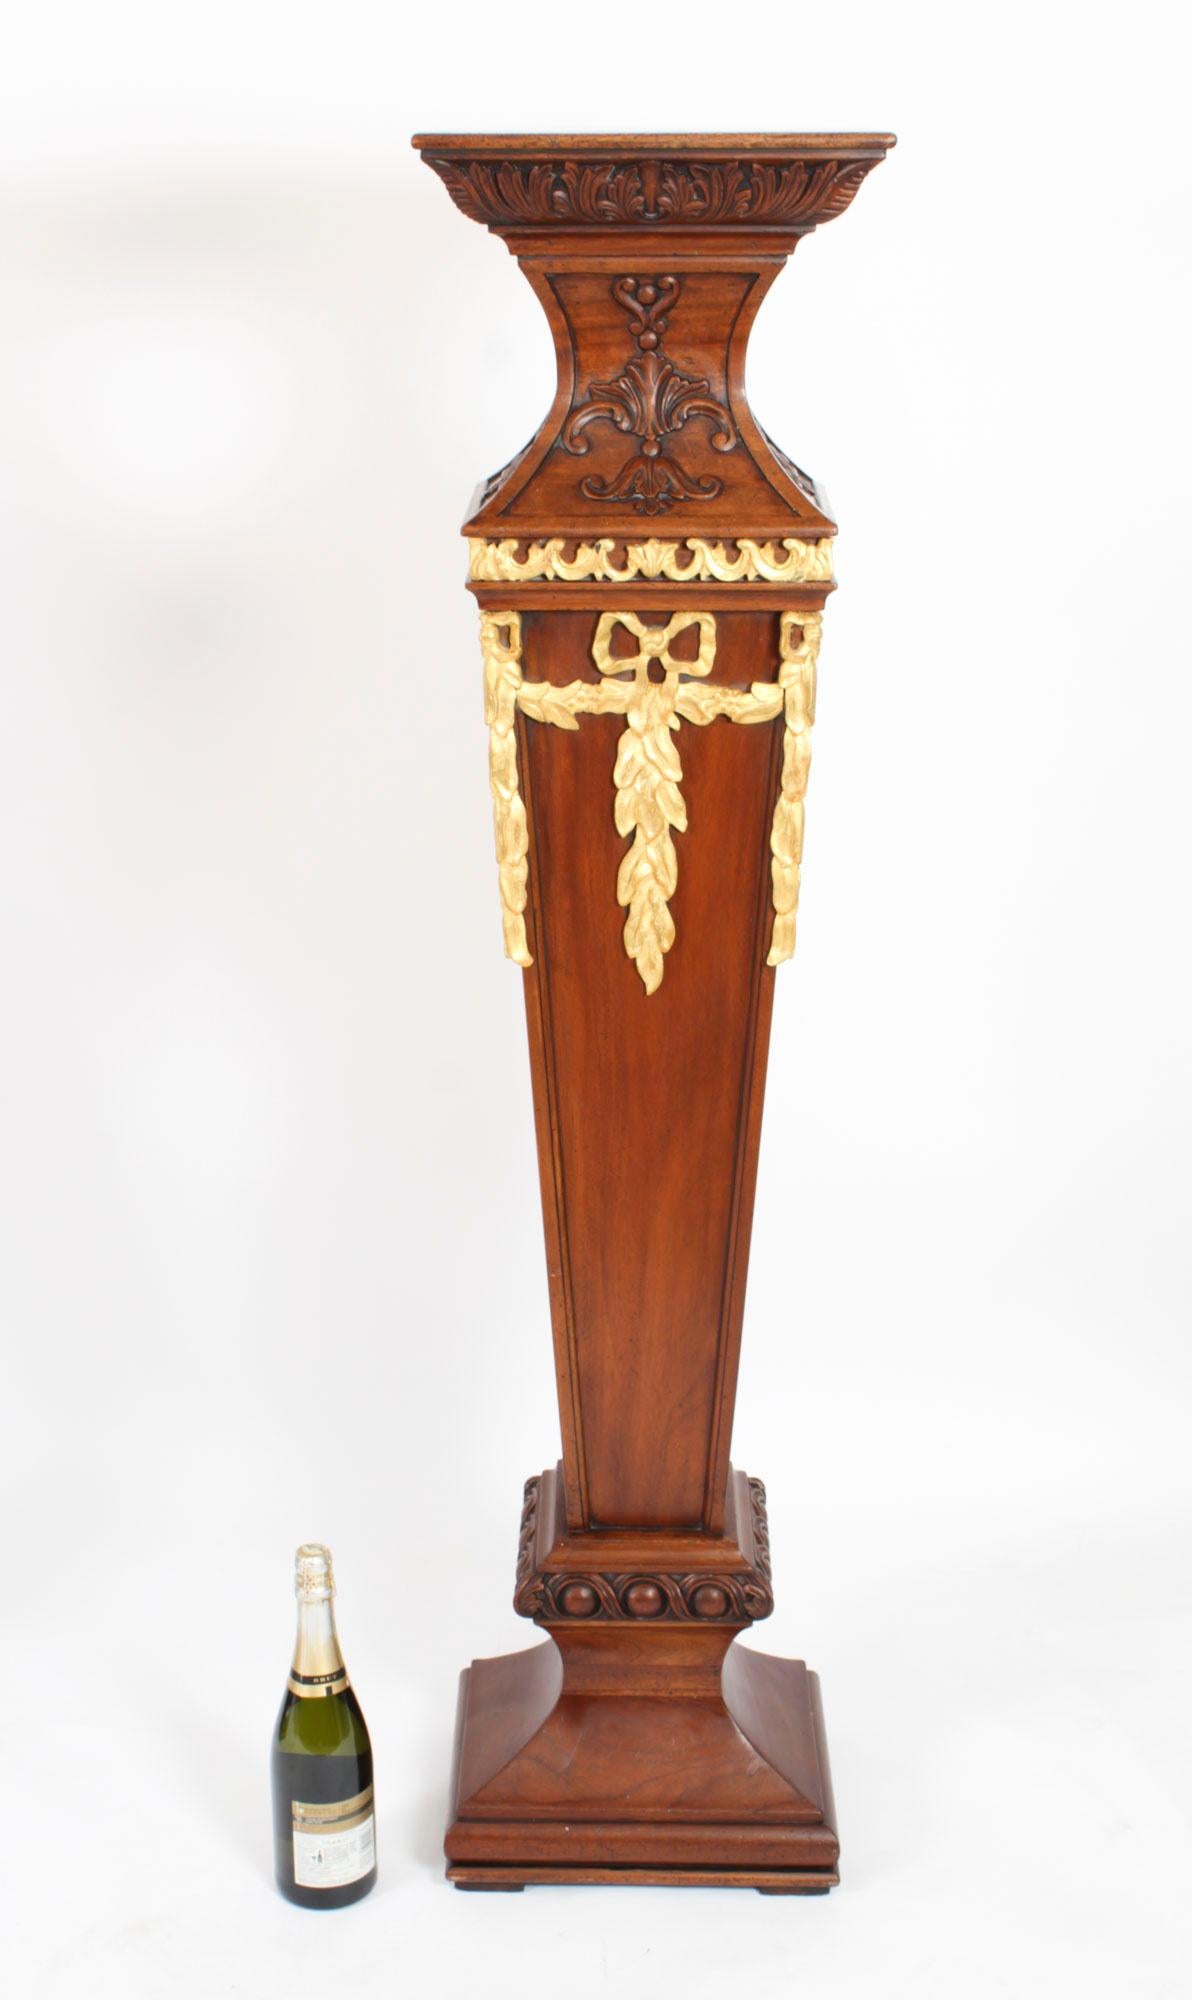 Antique Pair of Edwardian Mahogany Pedestals Torchere Stands Early 20th Century For Sale 9